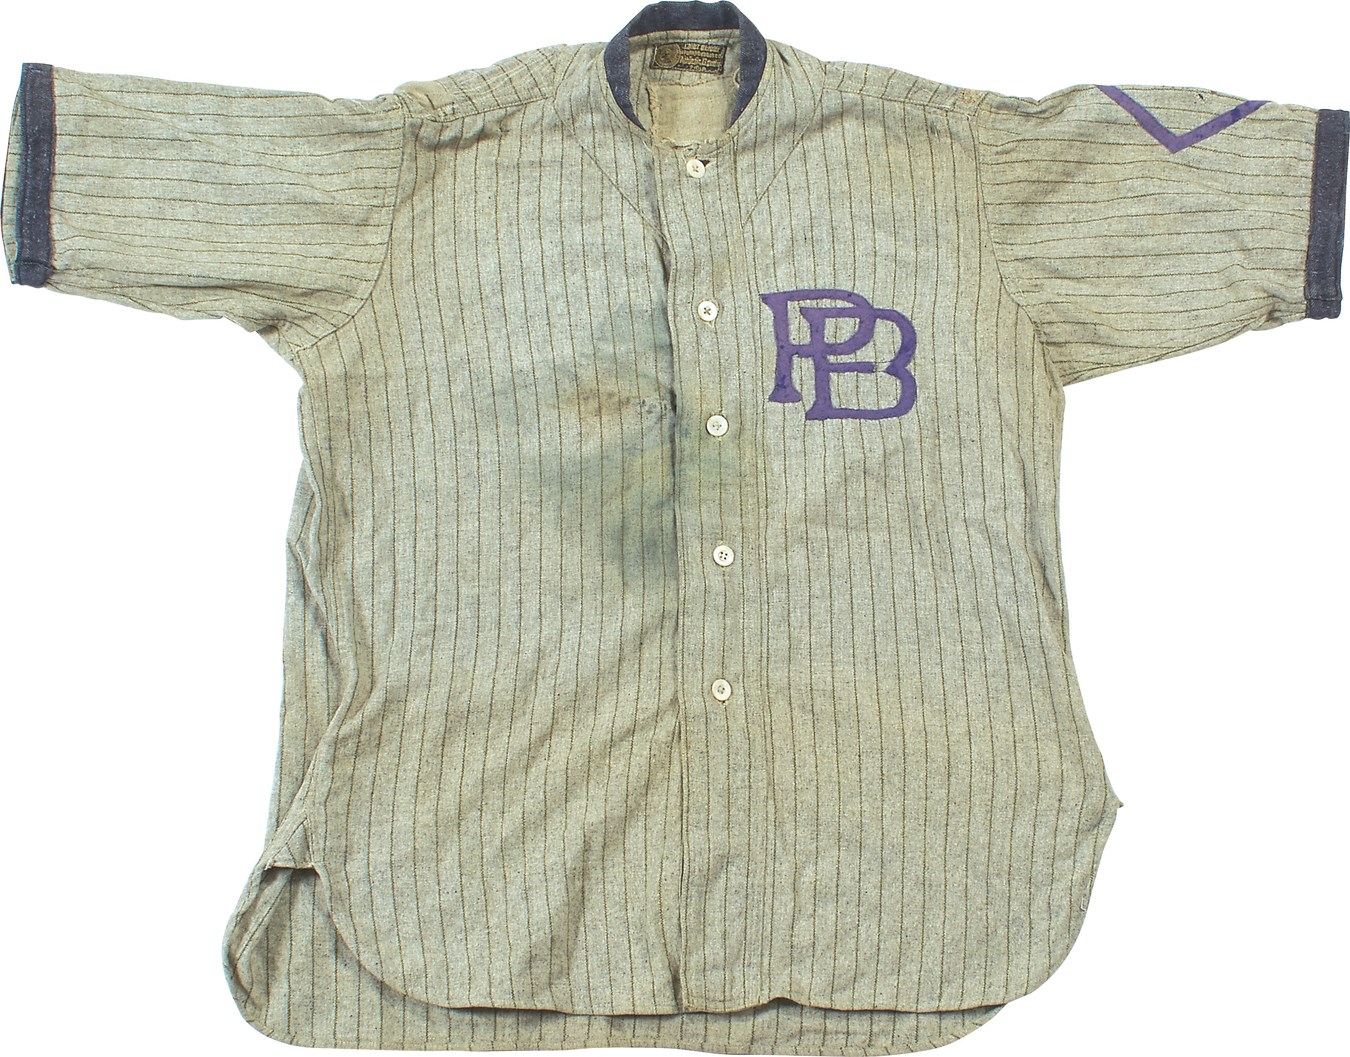 - 1910s Chief Bender Sporting Goods Full Baseball Uniform - Only One Known